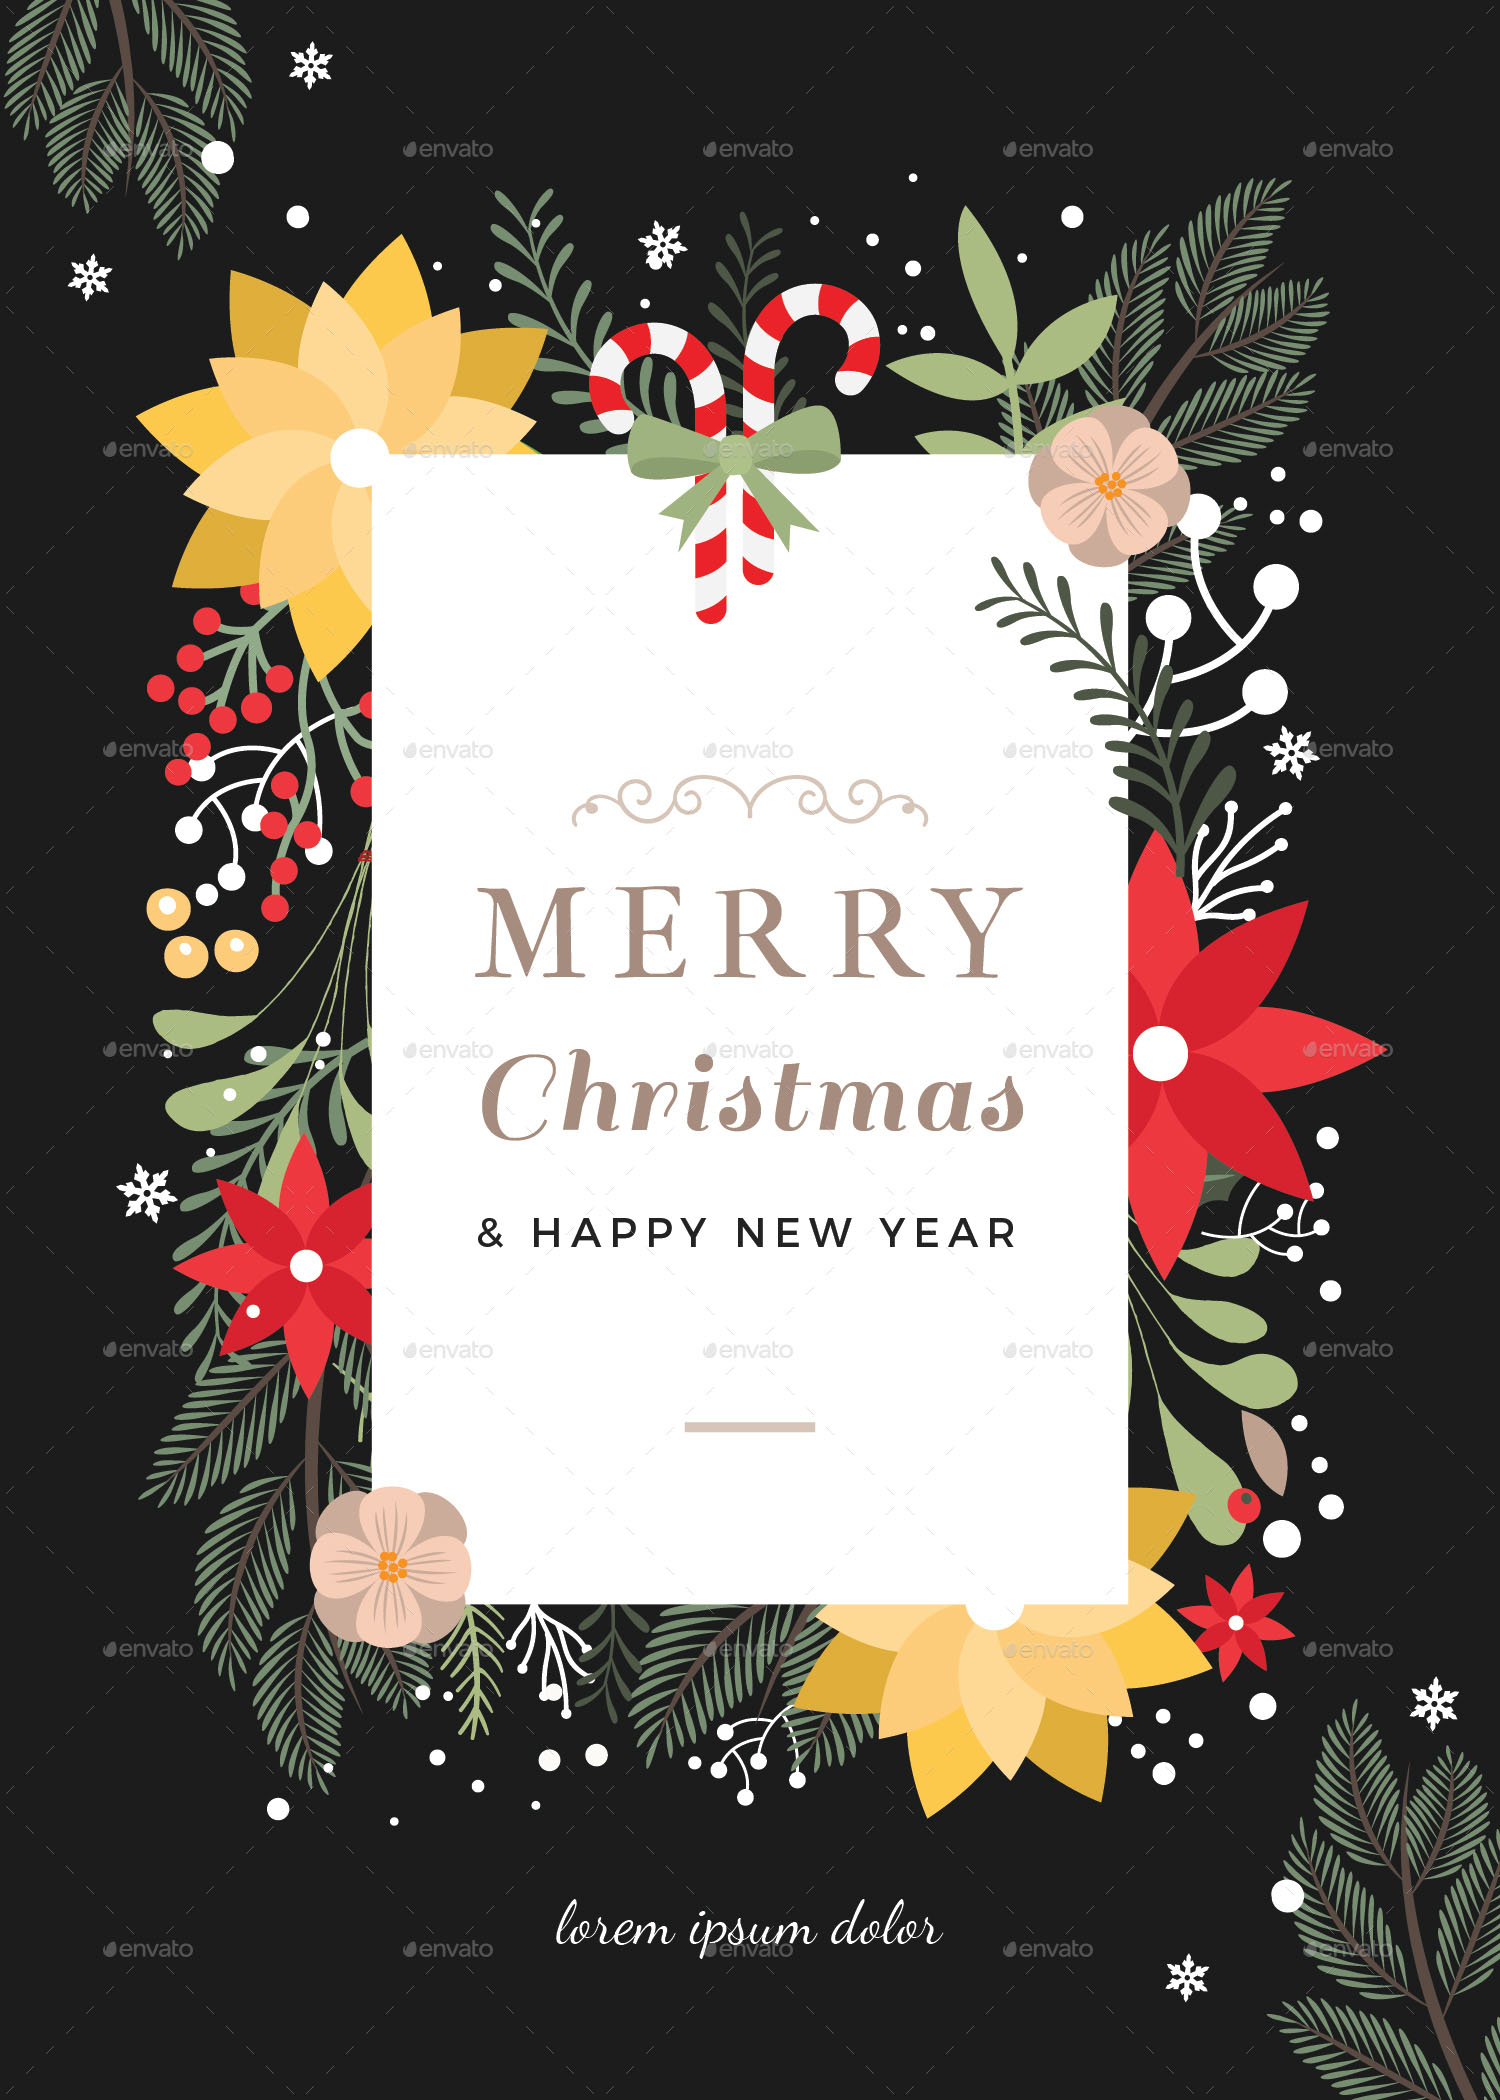 45 CHRISTMAS PREMIUM FREE PSD HOLIDAY CARD TEMPLATES FOR DESIGN AND